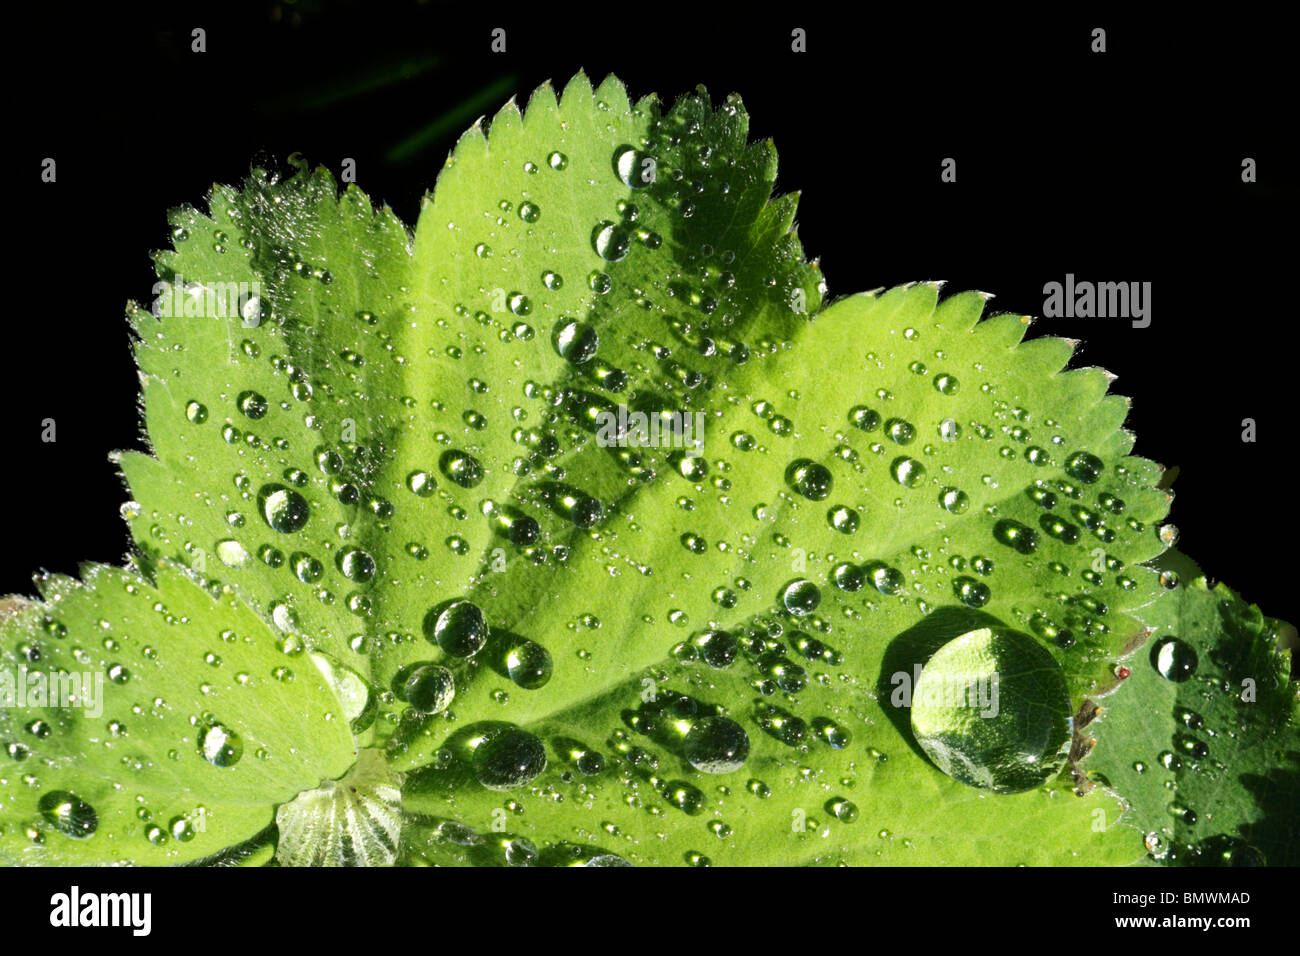 Lady's mantle (Alchemilla filicaulis) leaf covered with dew drops against a black background Stock Photo